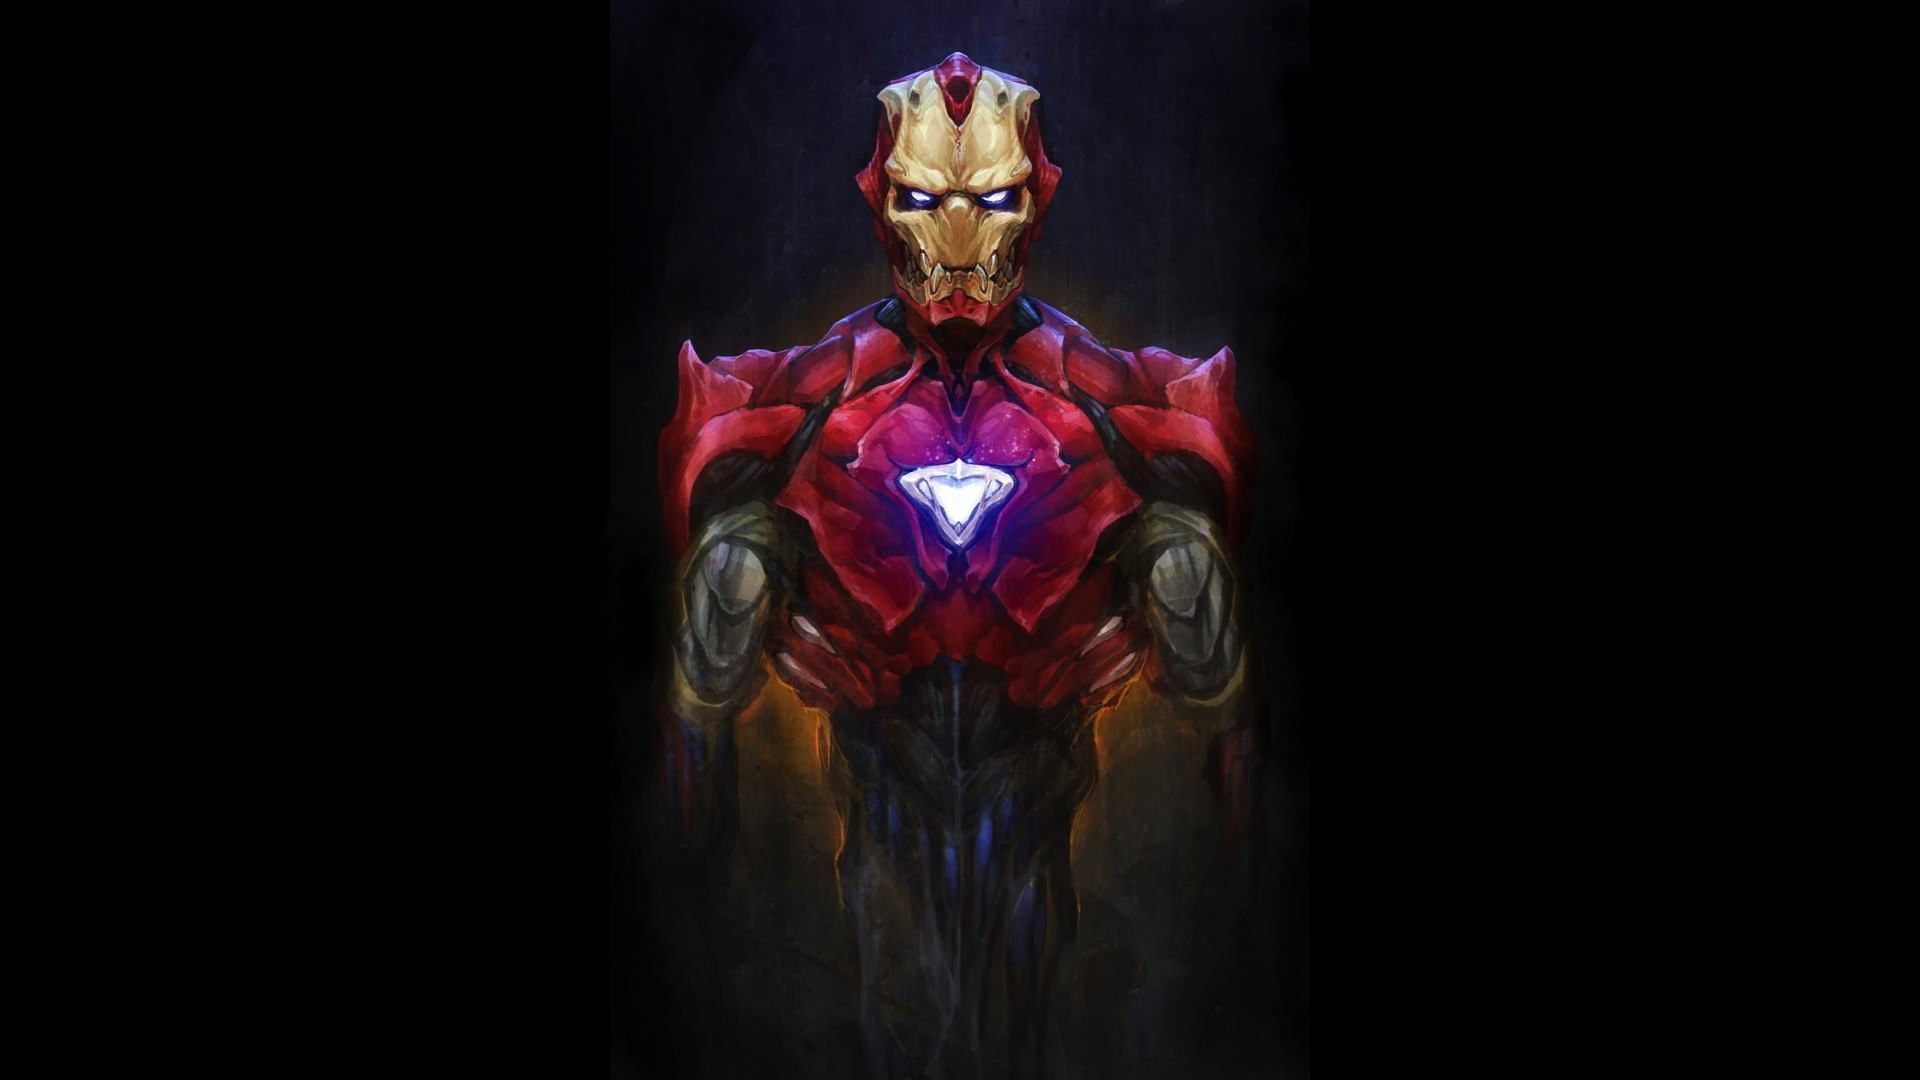 A zombie Iron Man? Or a post apocalyptic version of Iron Man? Could this have been the outcome had the Avengers lost the battle of New York? Who k